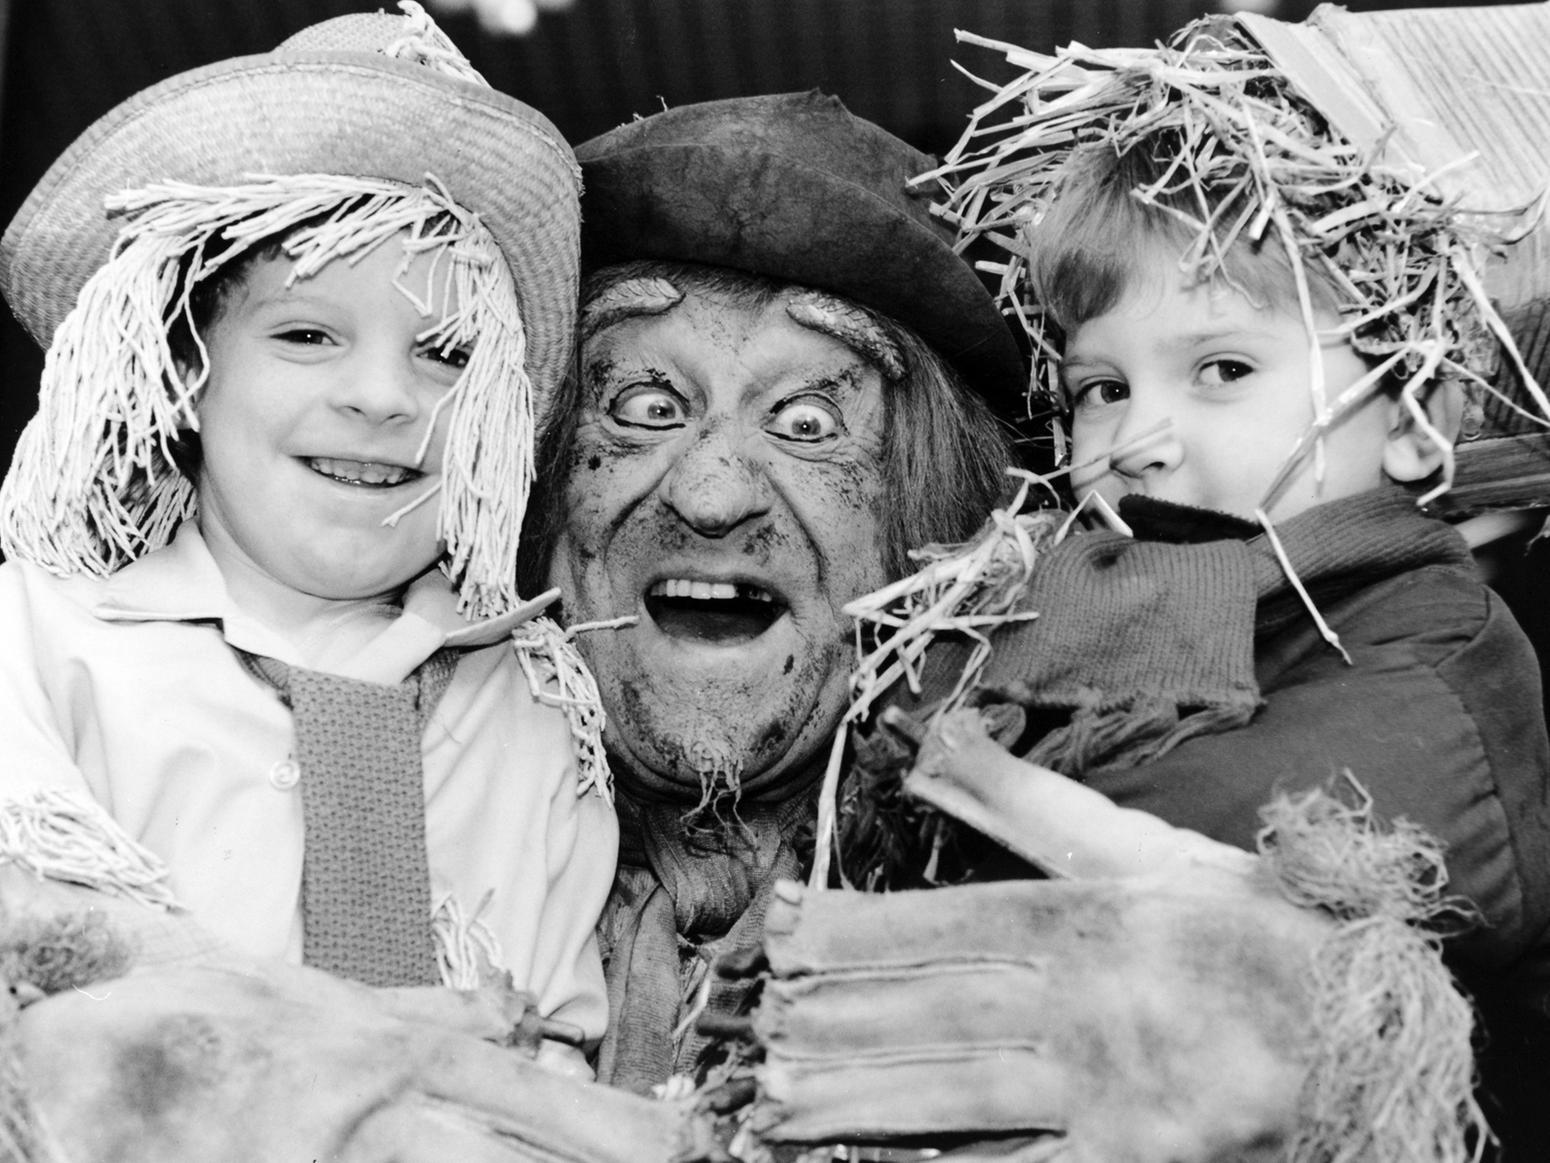 Actor and TV scarecrow Jon Pertwee is pictured at the Schofield Centre in Leeds with seven-year-old Wayne Kaeey and four-year-old Christopher Cunningham. The boys were winners of a Worzel Gummidge lookalike competition.